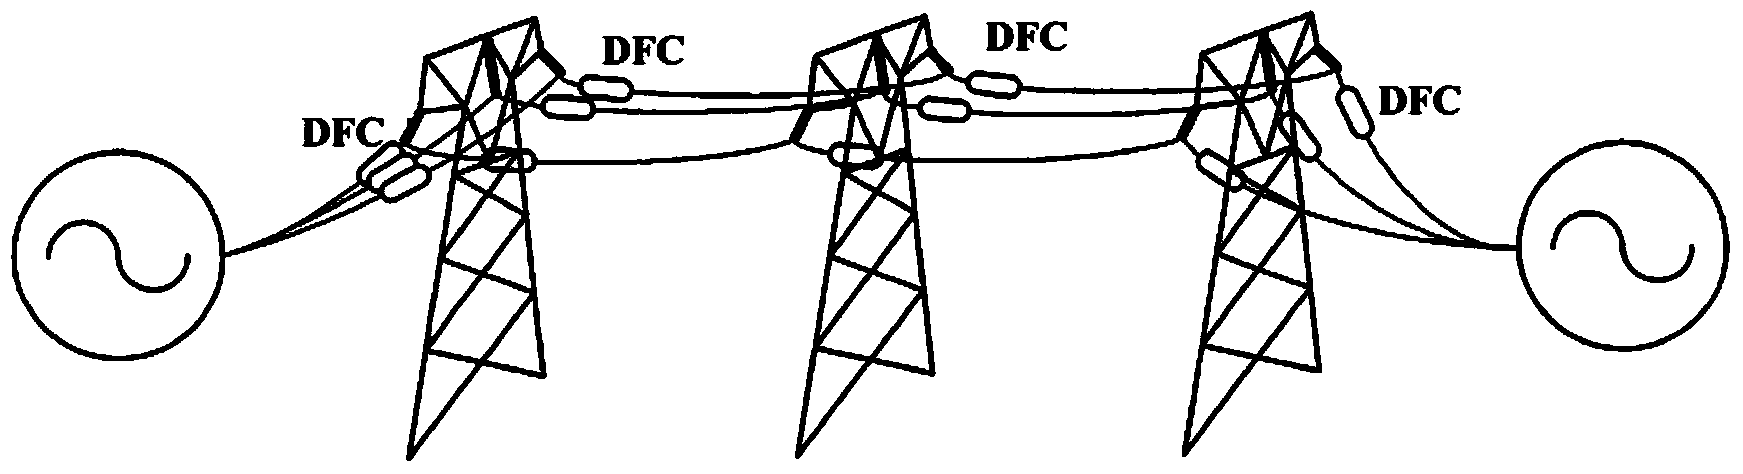 Compensation device for distributed series capacitor